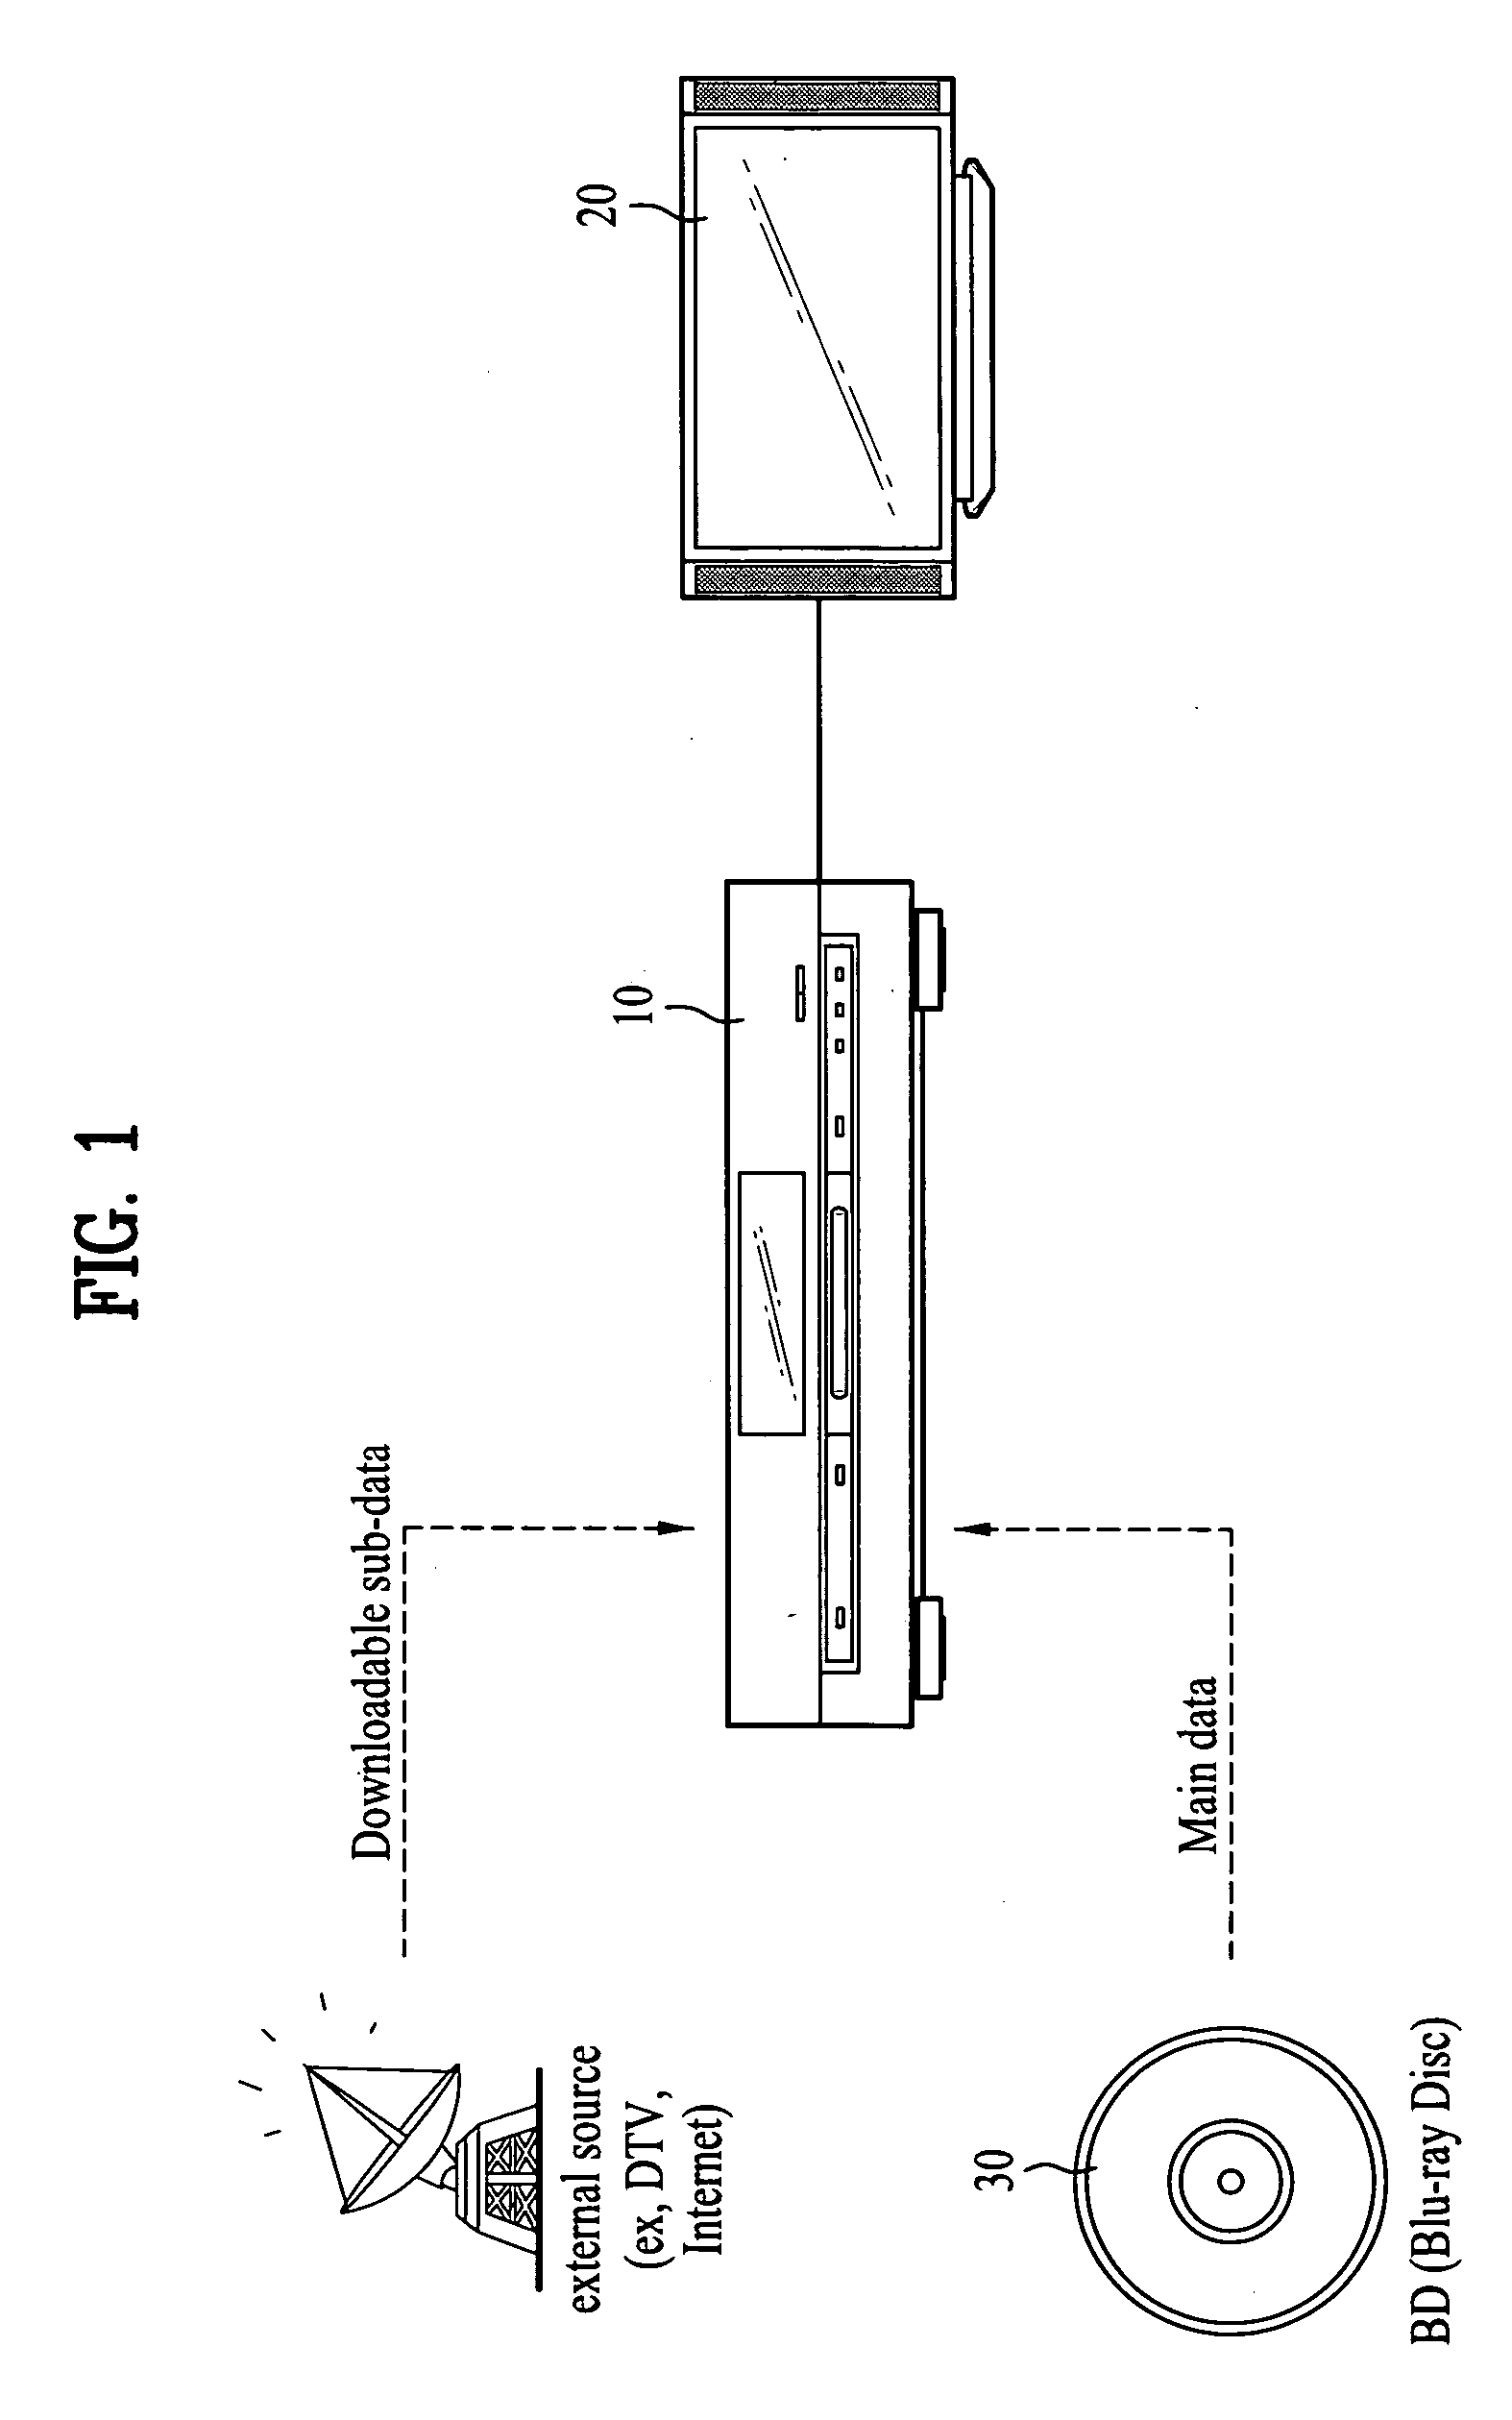 Method for configuring composite file structure for data reproduction, and method and apparatus for reproducing data using the composite file structure